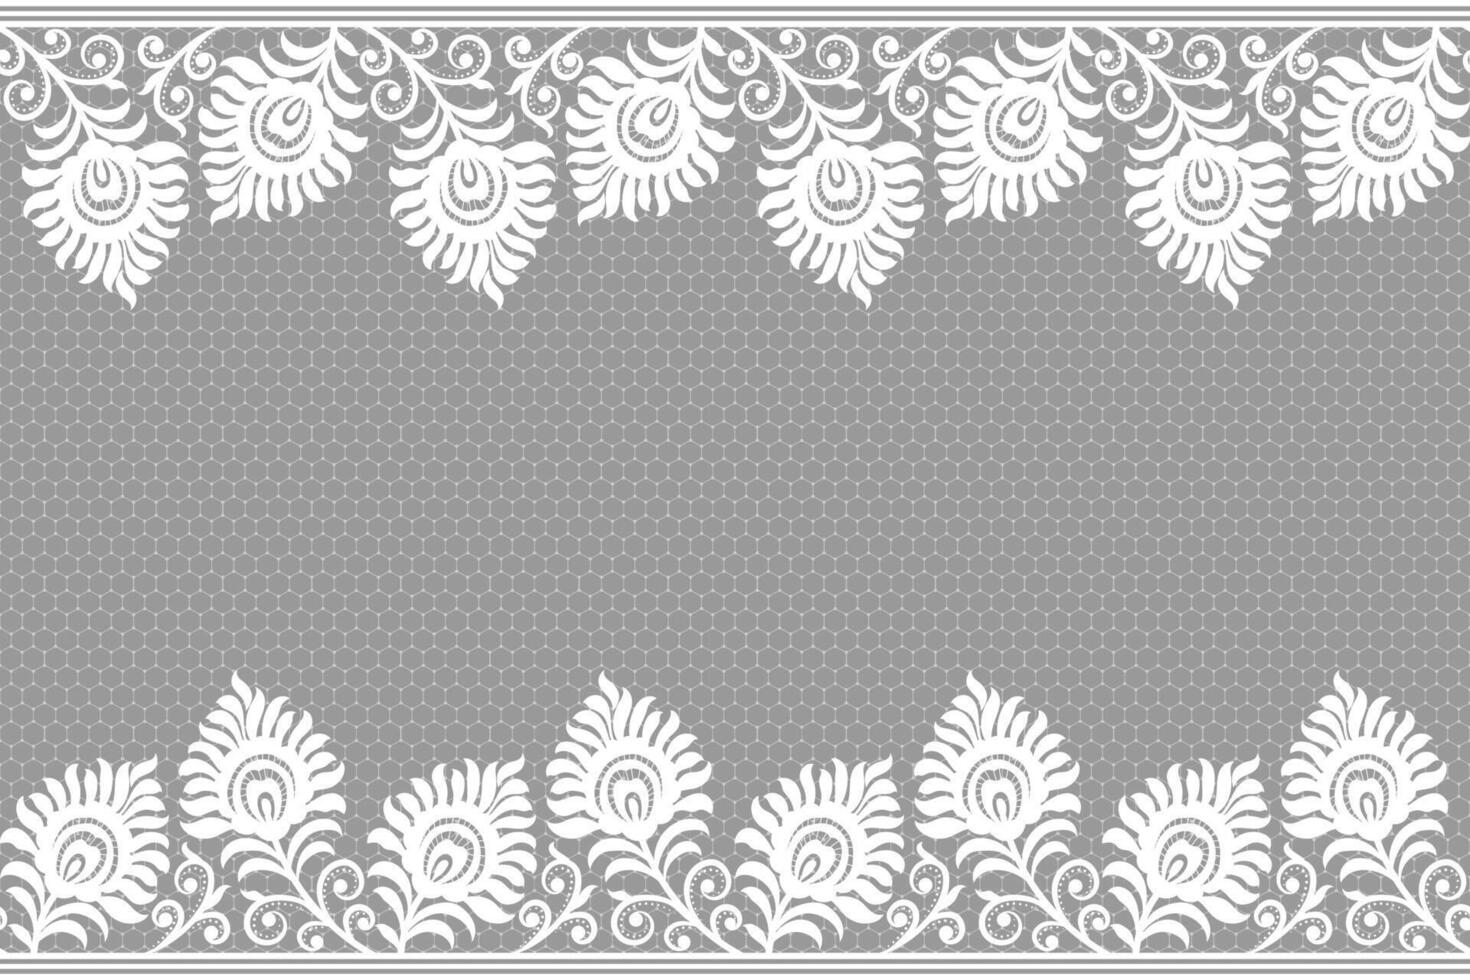 Lace seamless background Geometric ethnic oriental ikat seamless pattern traditional Design for background,carpet,wallpaper,clothing,wrapping,Batik,fabric,Vector illustration embroidery style. vector